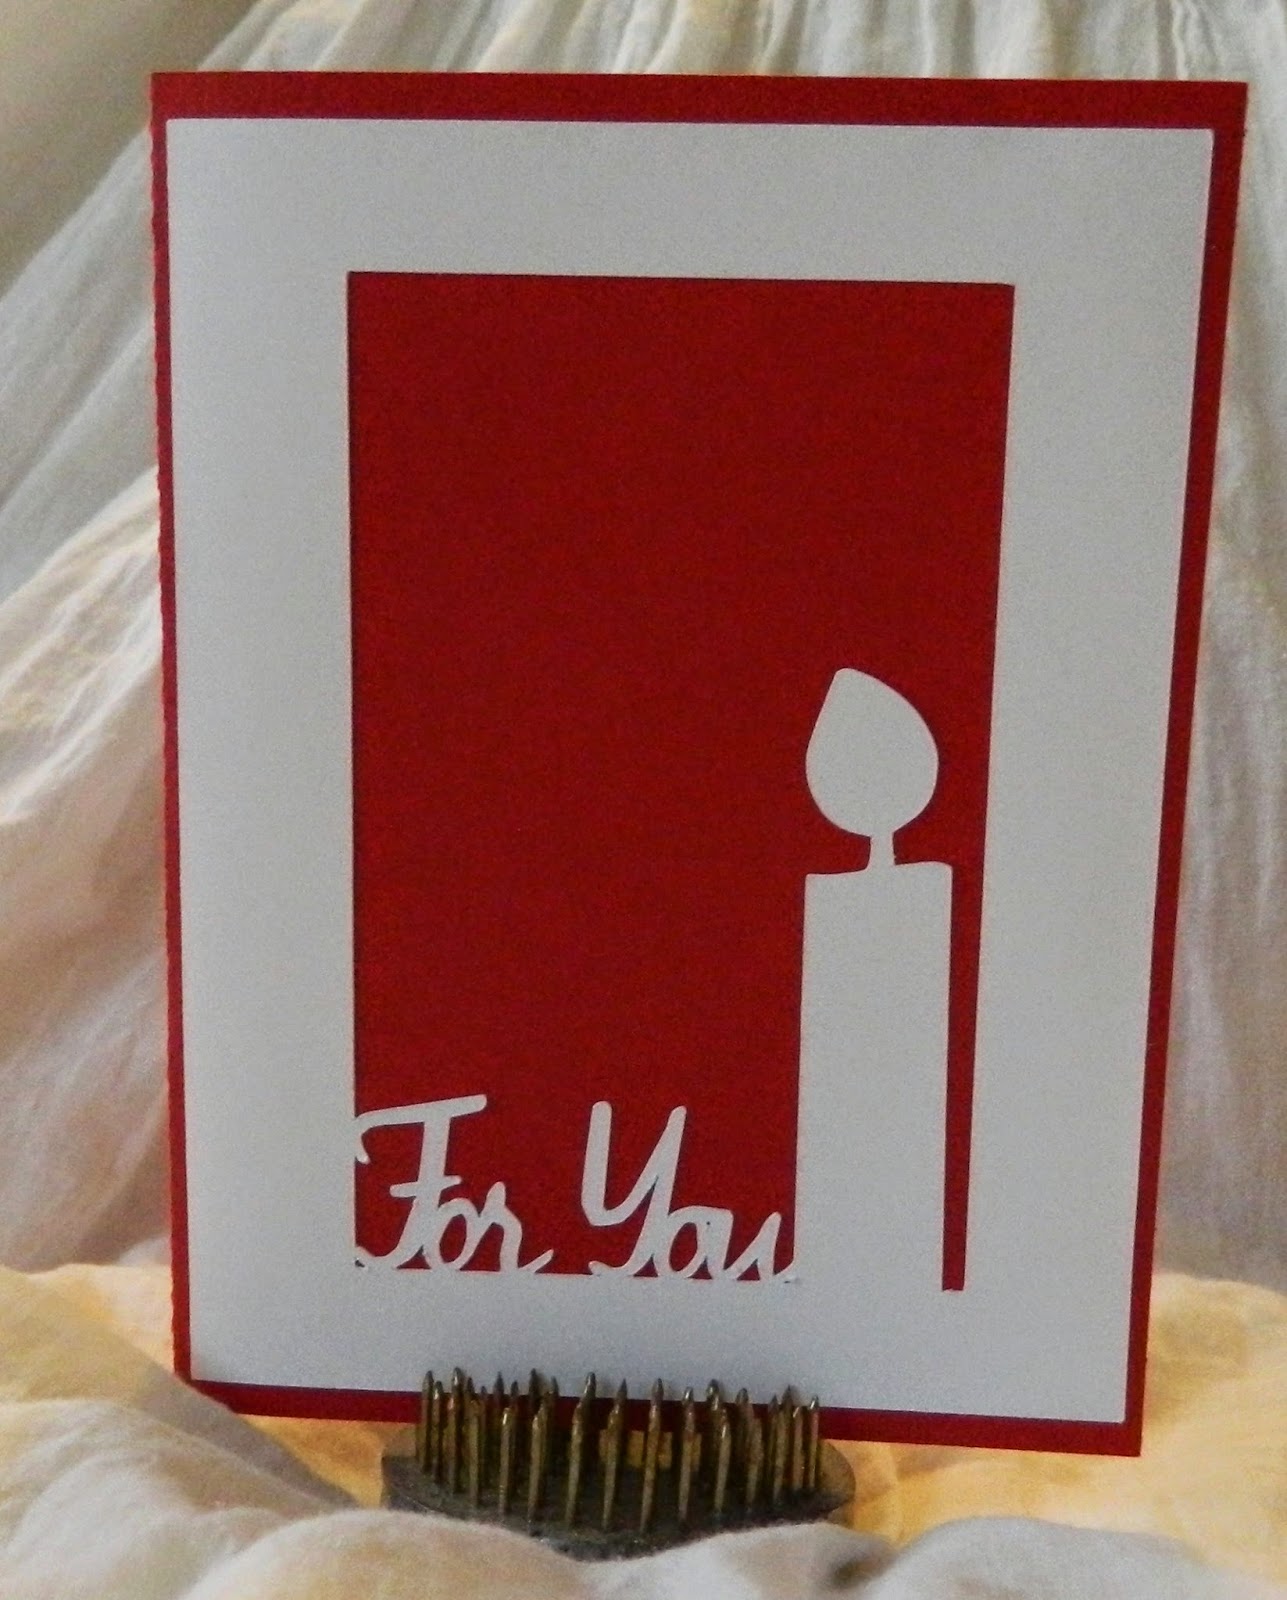 laura's frayed knot: Happy Birthday Pop-Up Card With Cake and Candles!